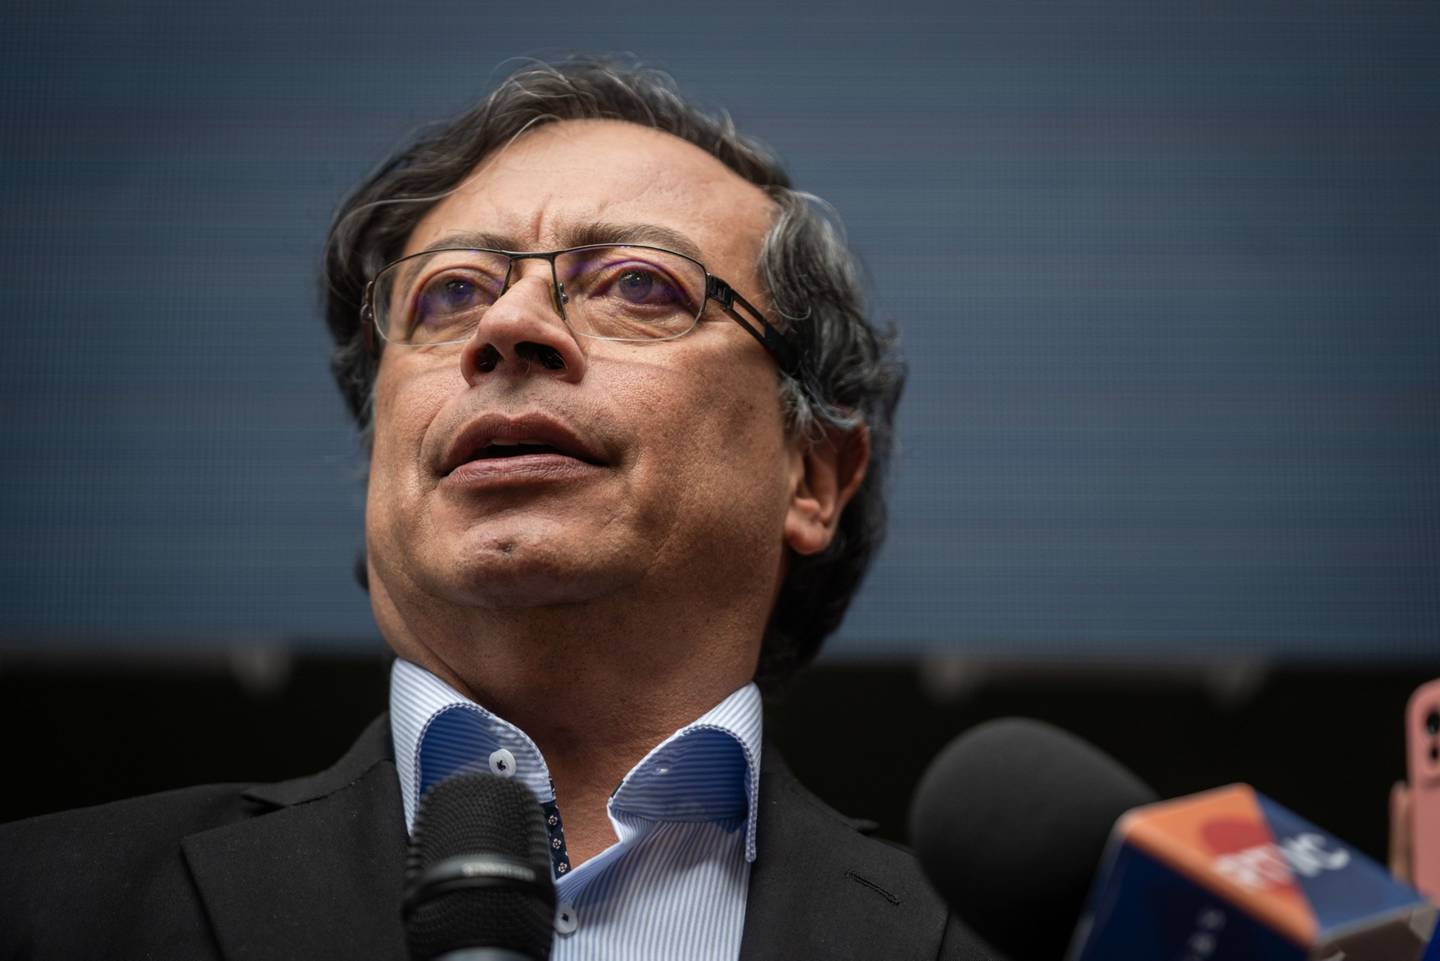 Gustavo Petro, presidential candidate of the Colombia Humana party, speaks to members of media after registering his candidacy at the National Civil Registry in Bogota, Colombia, on Thursday, Jan. 20, 2022. Petro is calling on ideological allies across Latin America and the world to join him in forming a new bloc to lead the economy away from fossil fuels. Photographer: Nathalia Angarita/Bloomberg